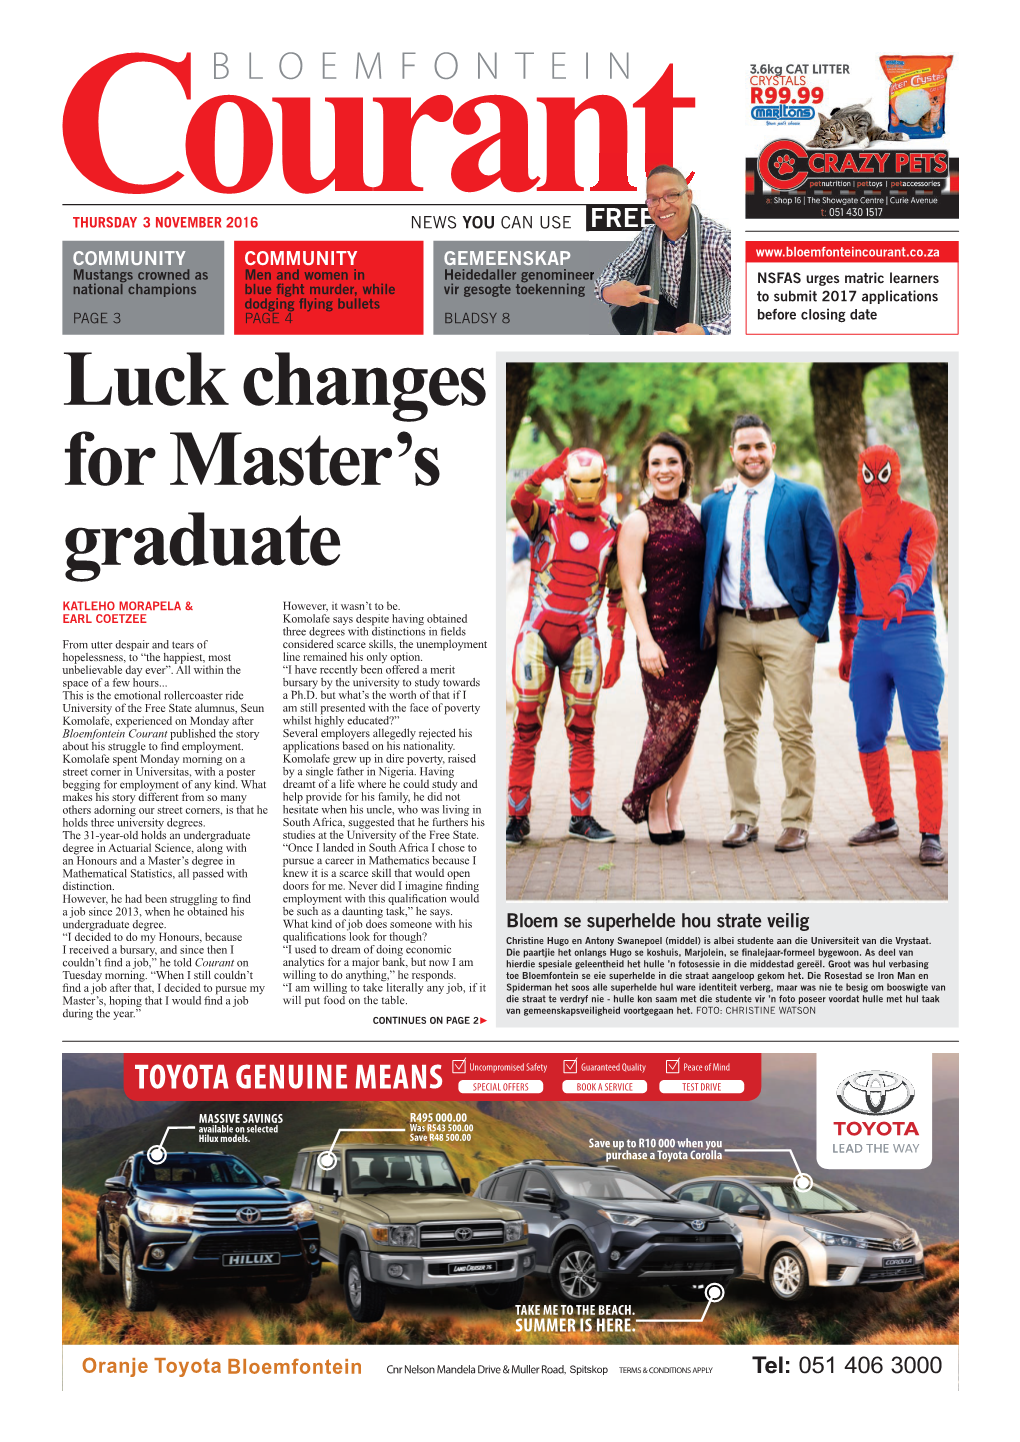 Luck Changes for Master's Graduate